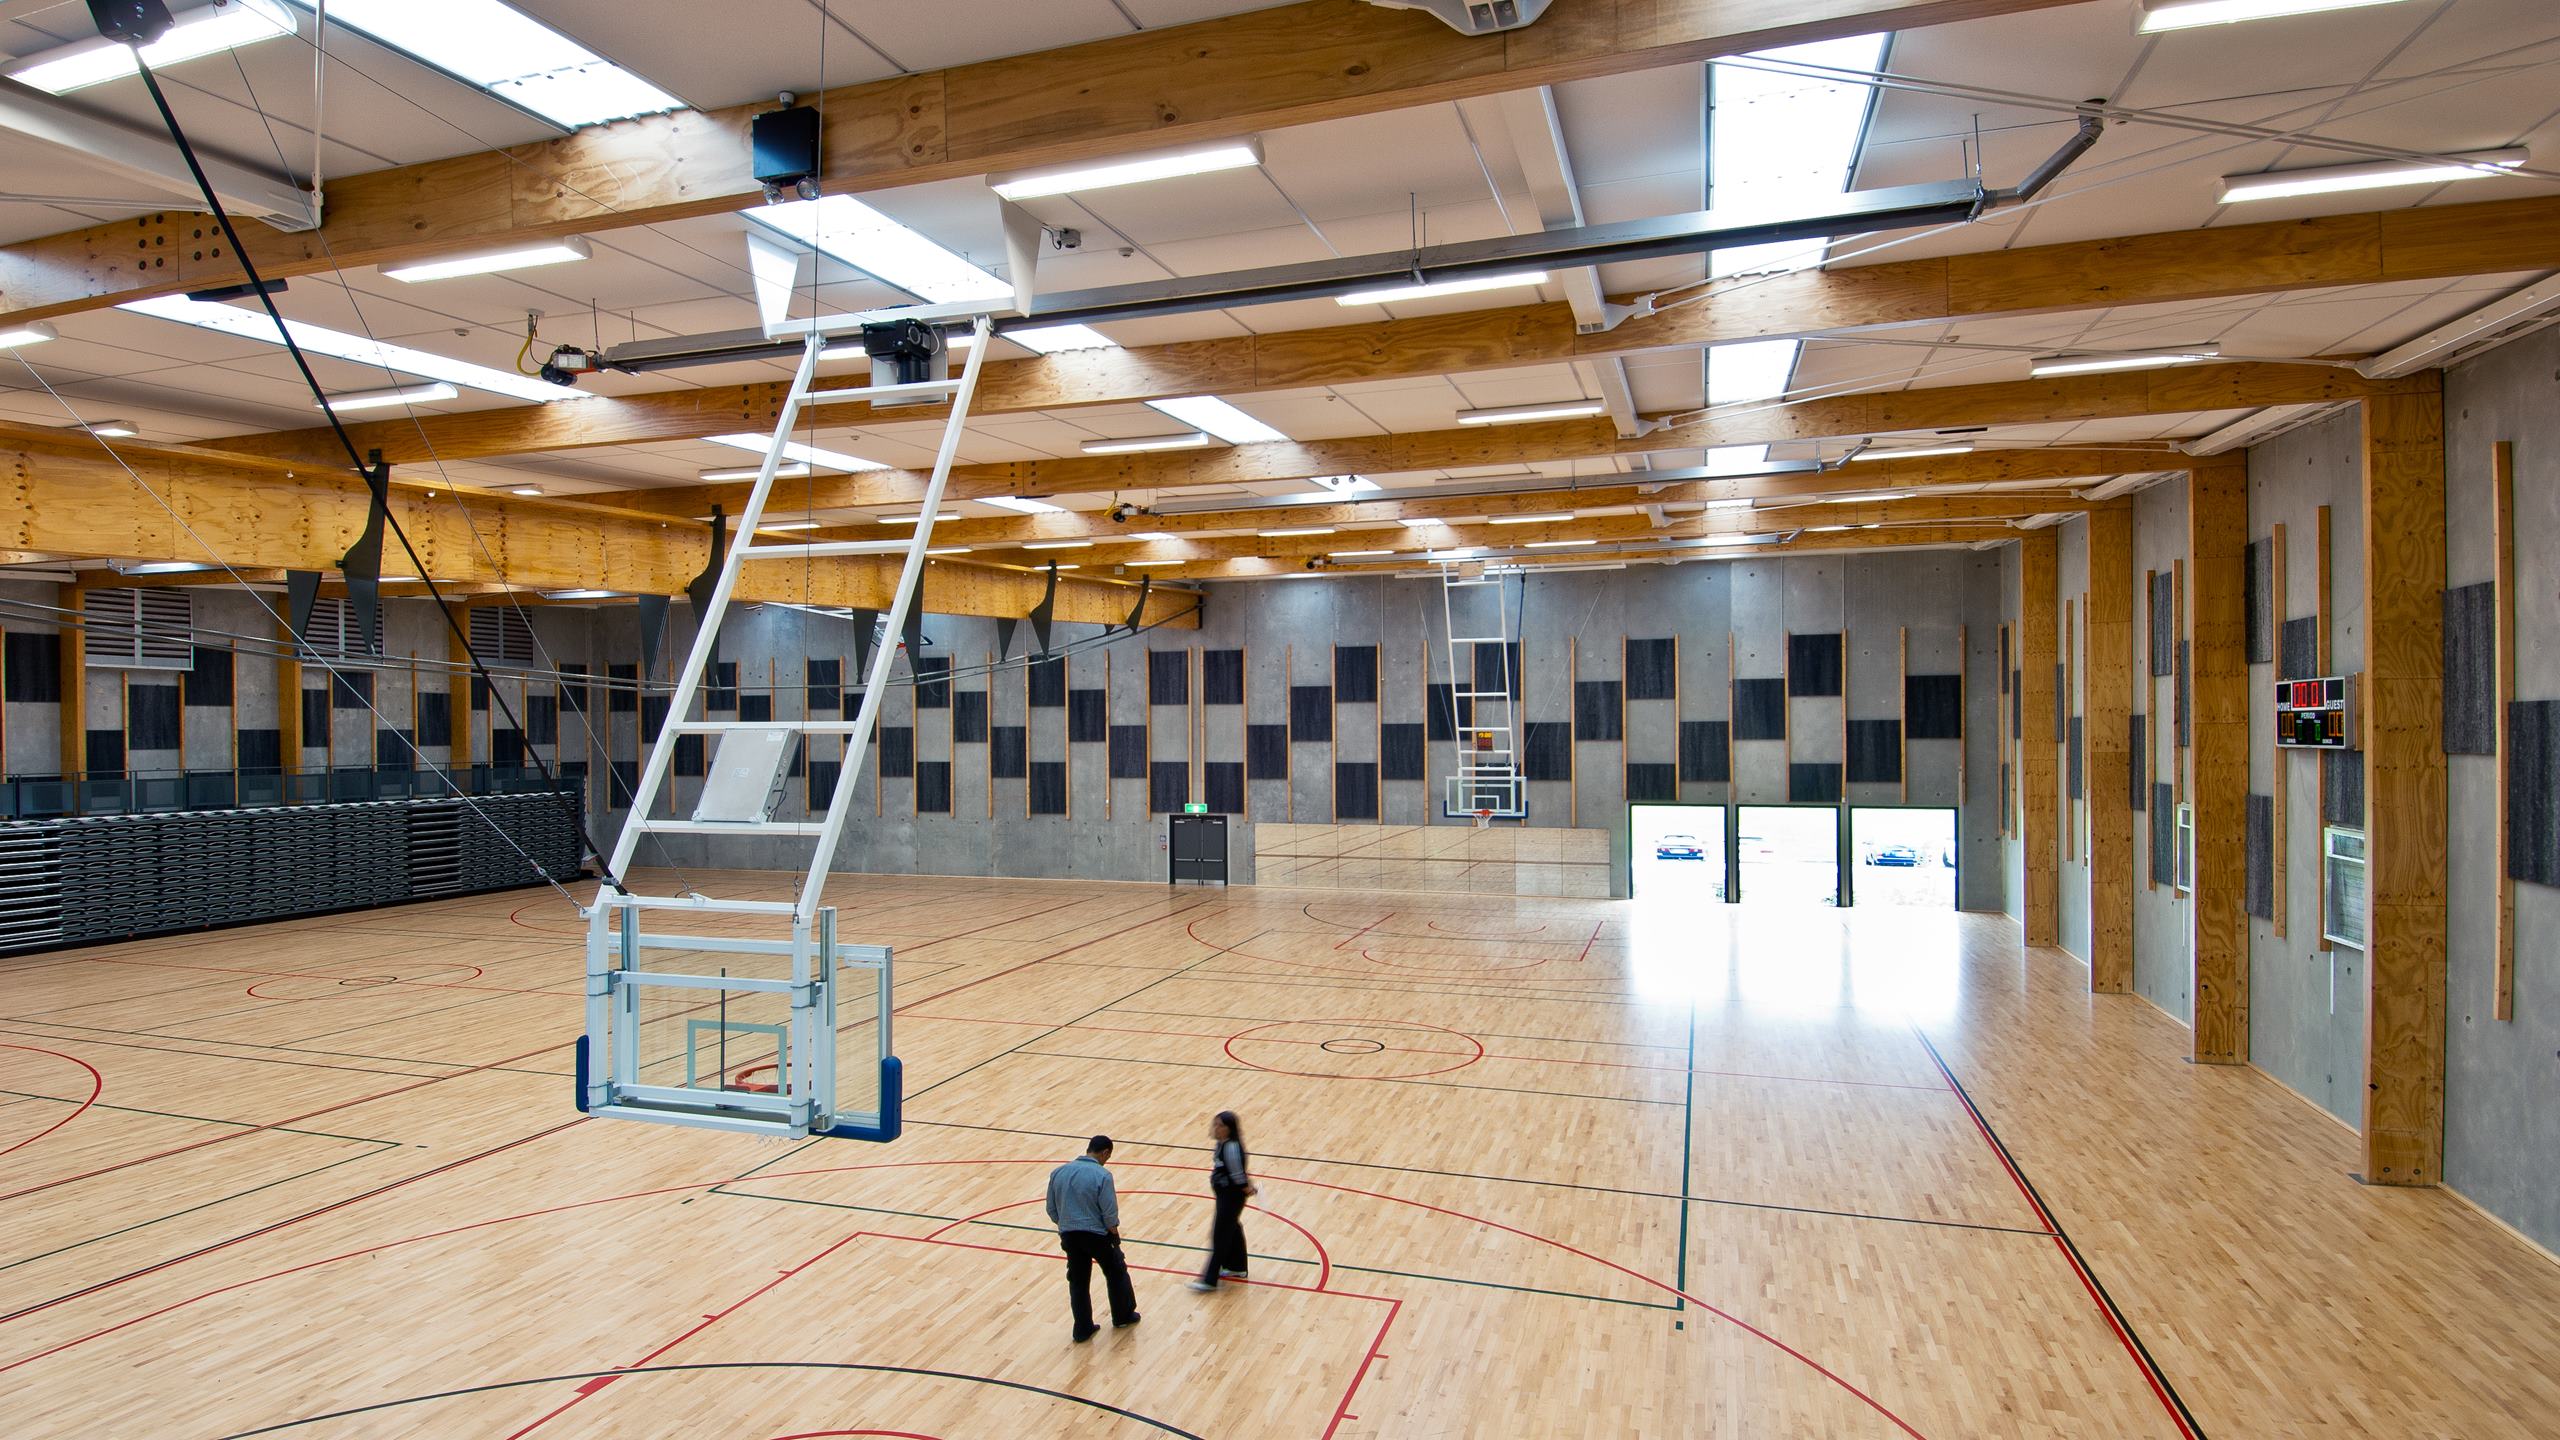 Nga Pura Pura Sports Complex showing over sized Triton Sports panels installed to the ceilings of the gymnasium